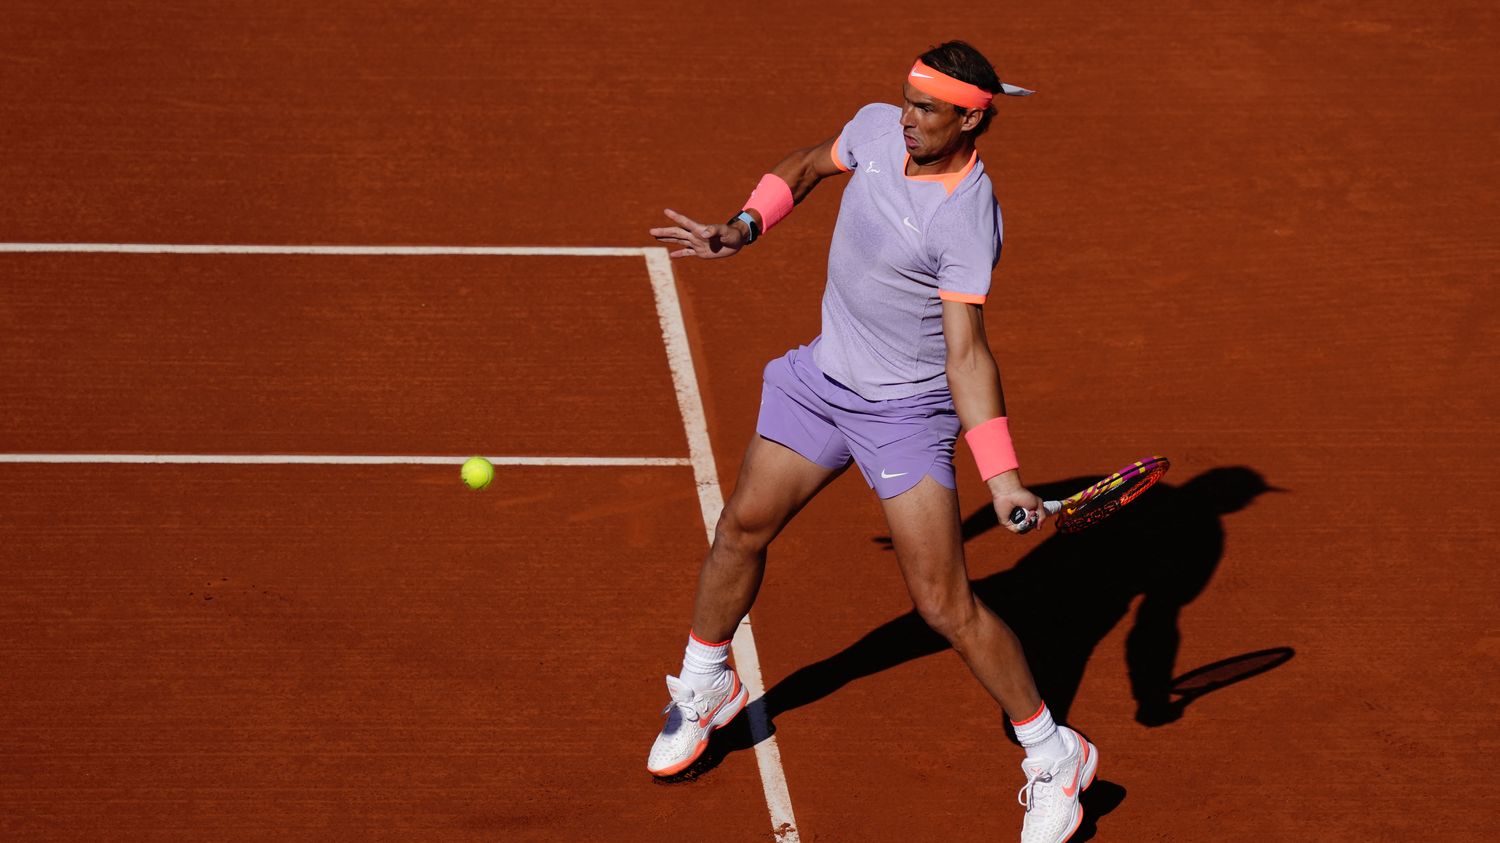 Tennis: Rafael Nadal successfully returns to the tournament in Barcelona